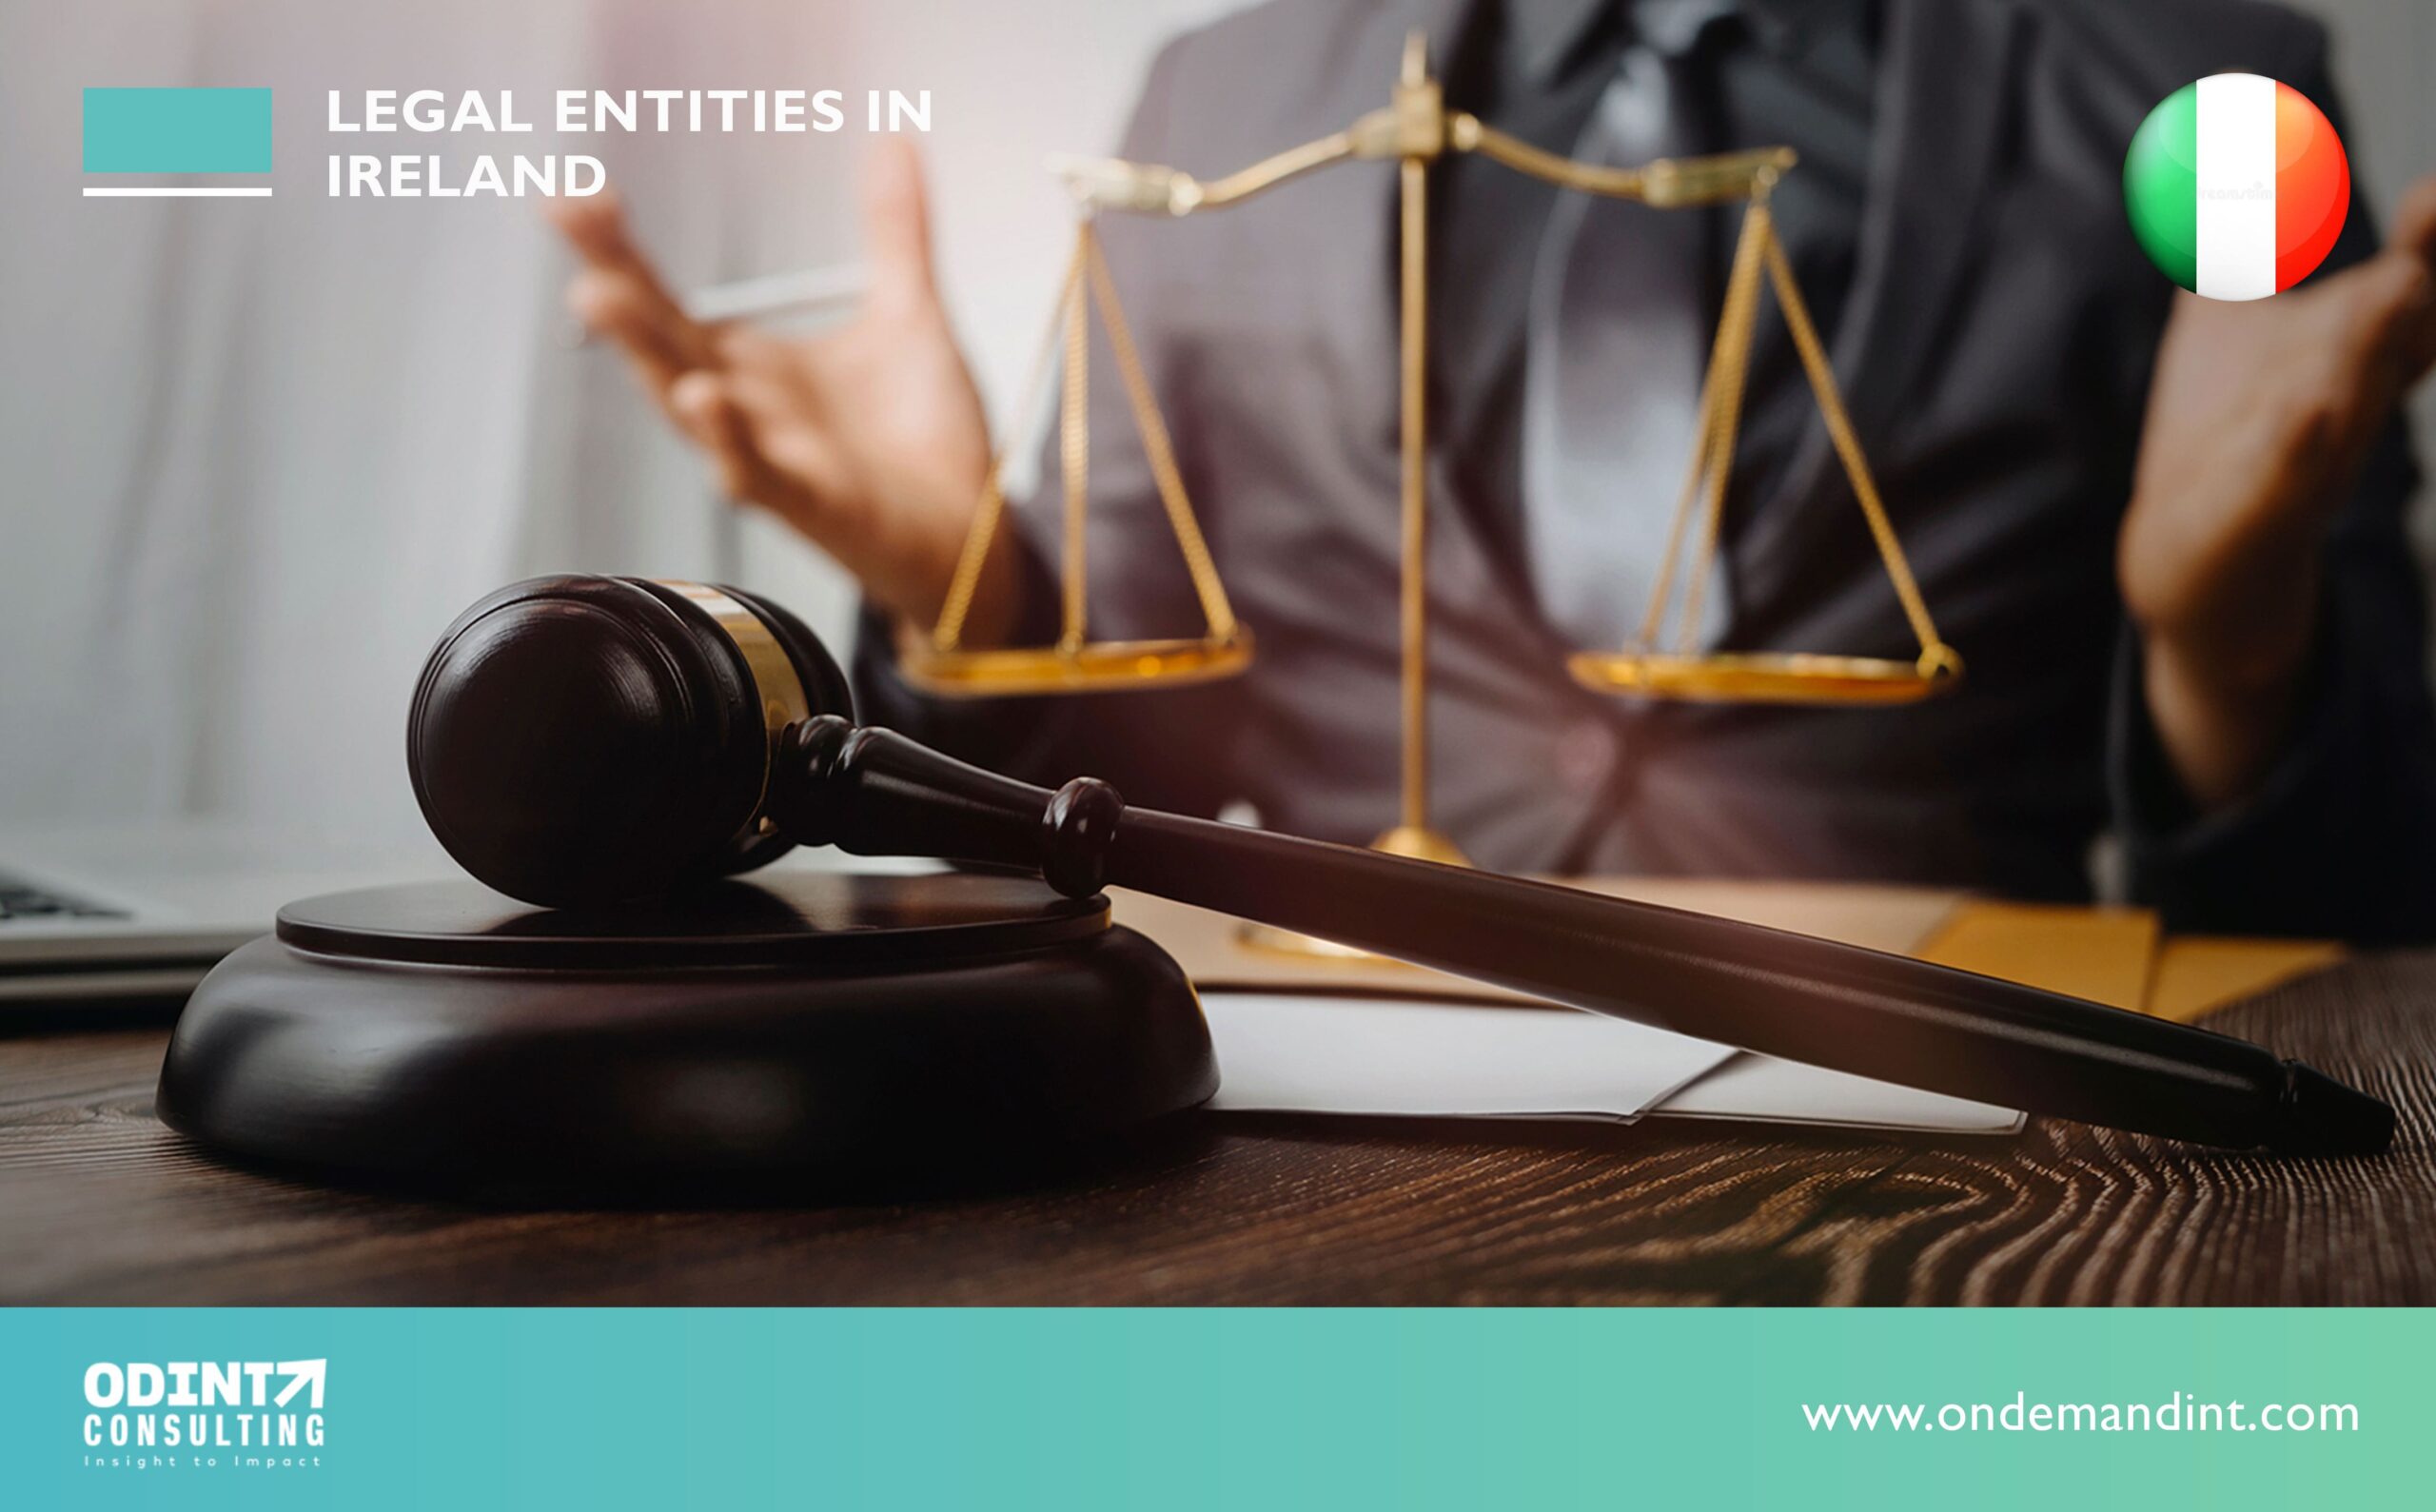 8 Legal Entities in Ireland: Compliances, Advantages & Additional Information